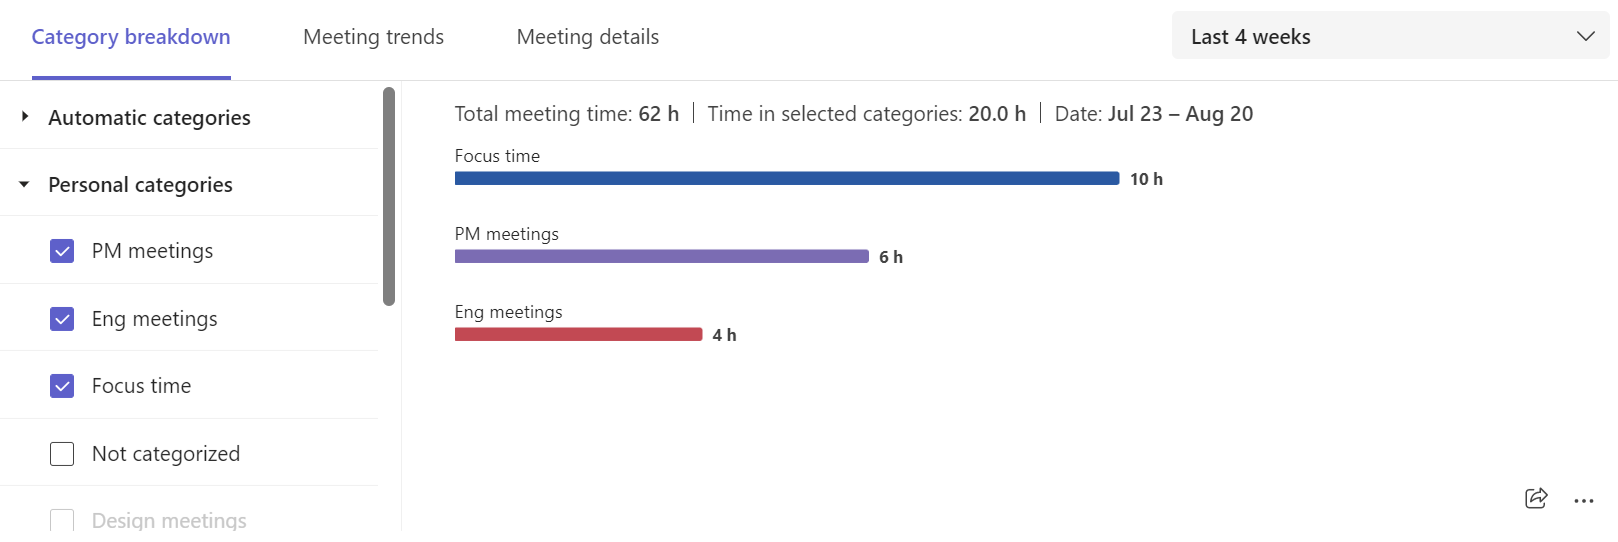 Screenshot that shows meeting category breakdowns